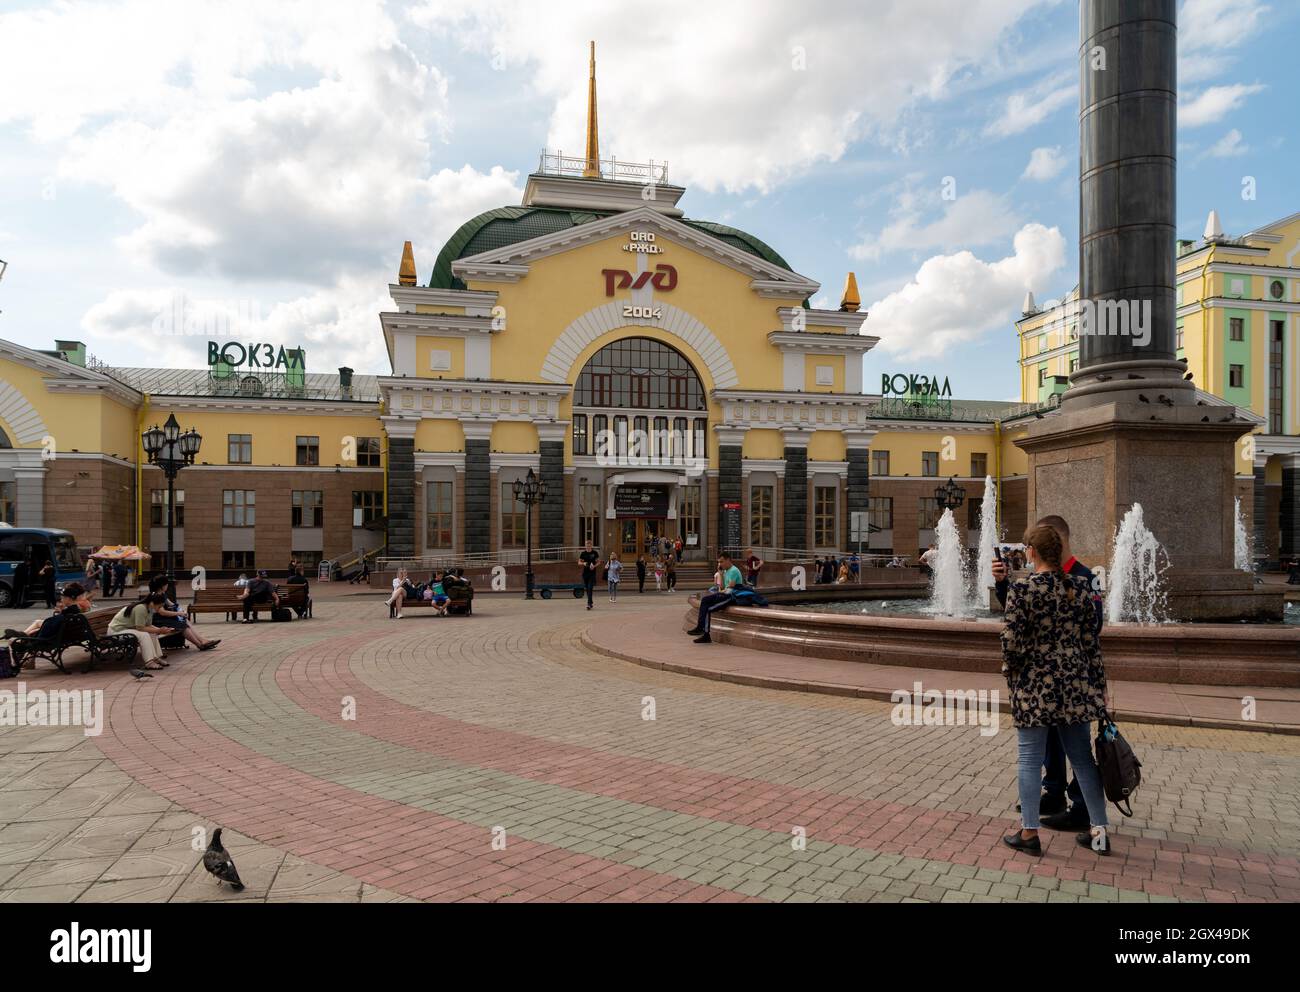 People rest at the fountain on the Railway Station Square in front of the main railway station with the Russian Railways logo in Russian on the facade Stock Photo